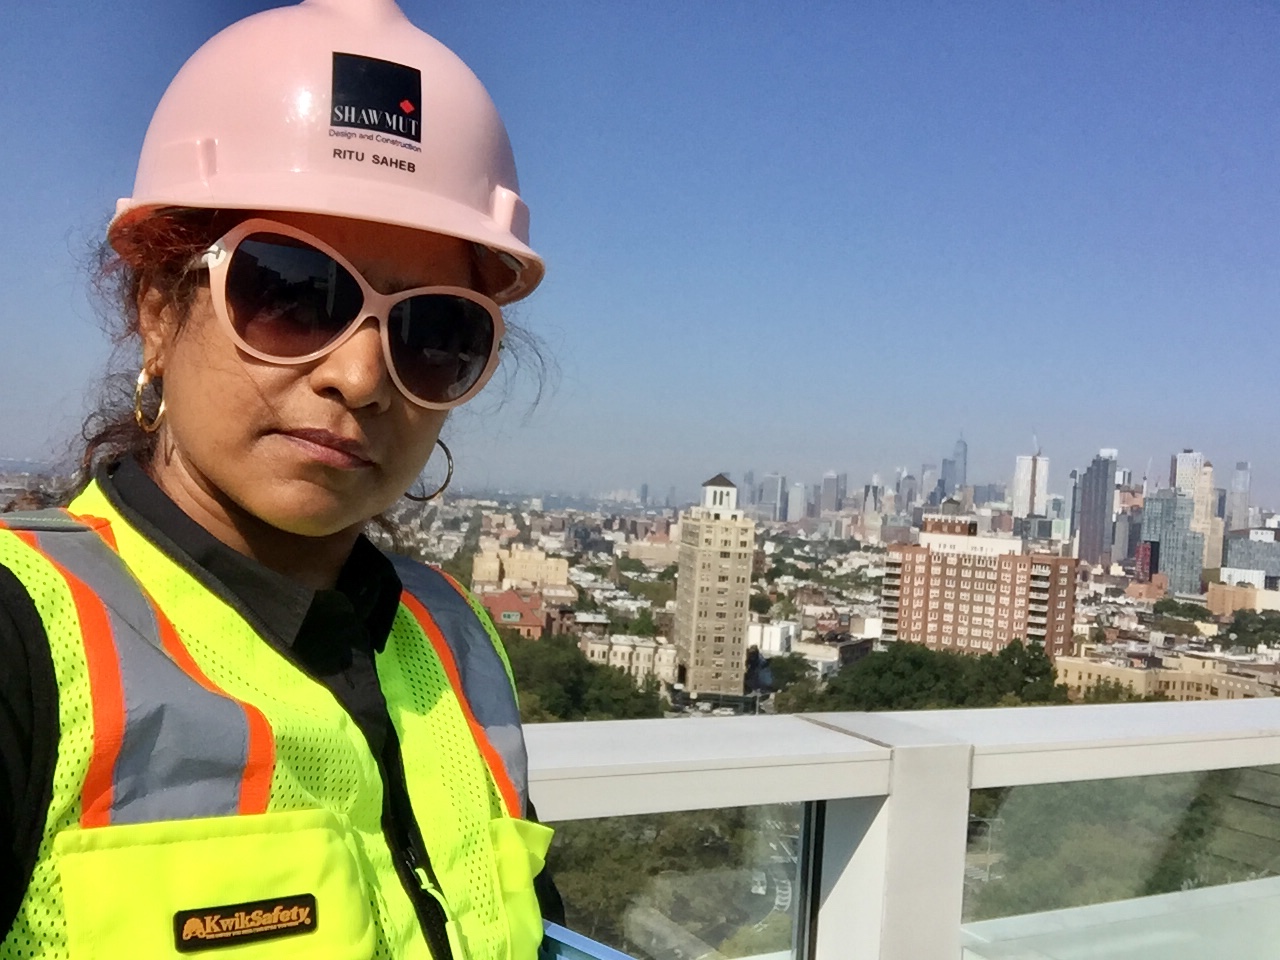 Looking for architect marketing inspiration? Since Ritu Saheb started a Firm of Her Own, she feels more confident and fulfilled. Find out why in this short Q&A.